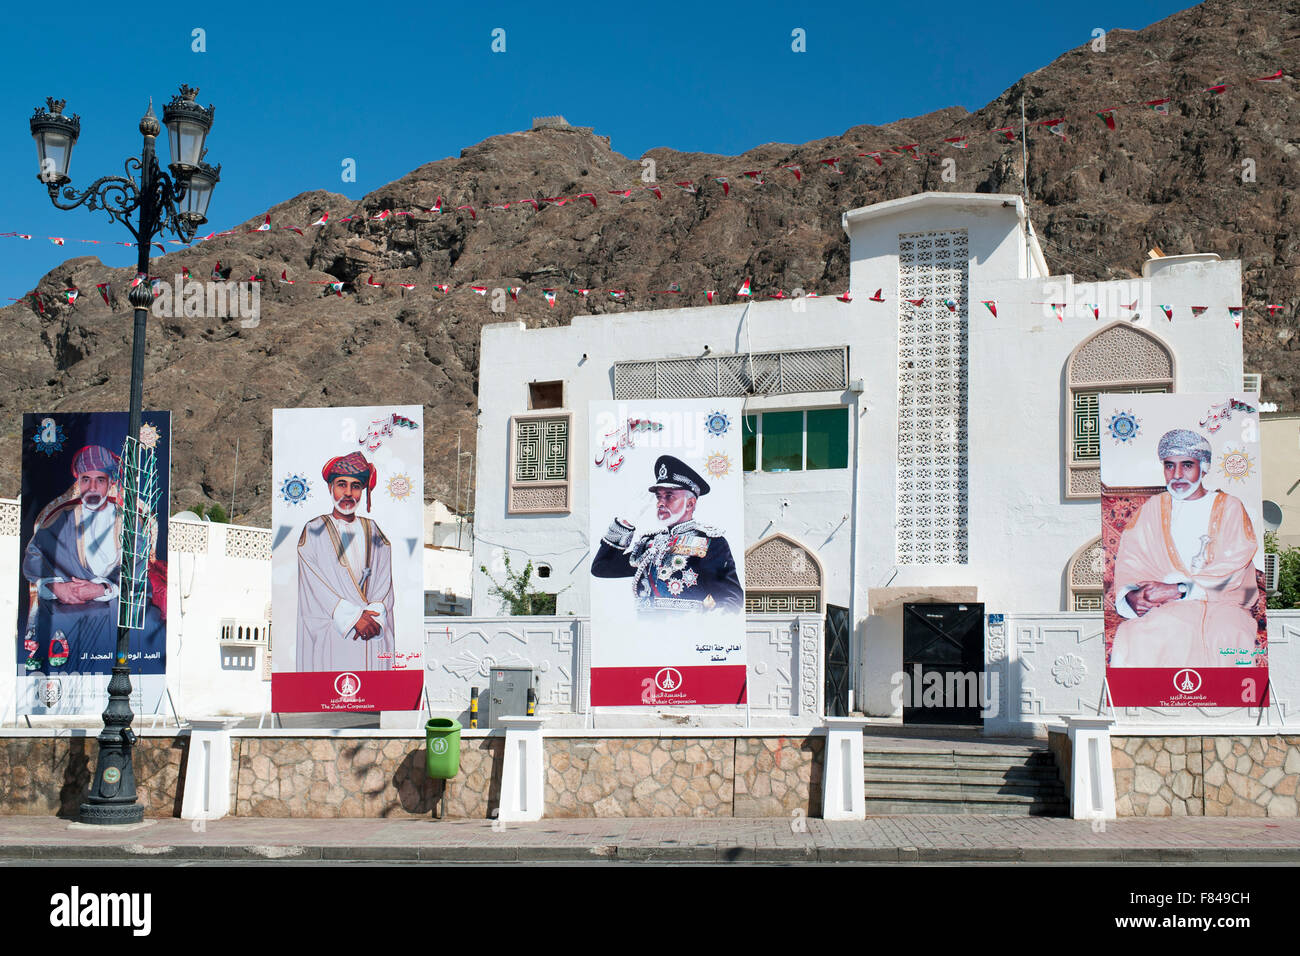 Posters of the Sultan of Oman in Old Muscat, part of the capital of the Sultanate of Oman. Stock Photo